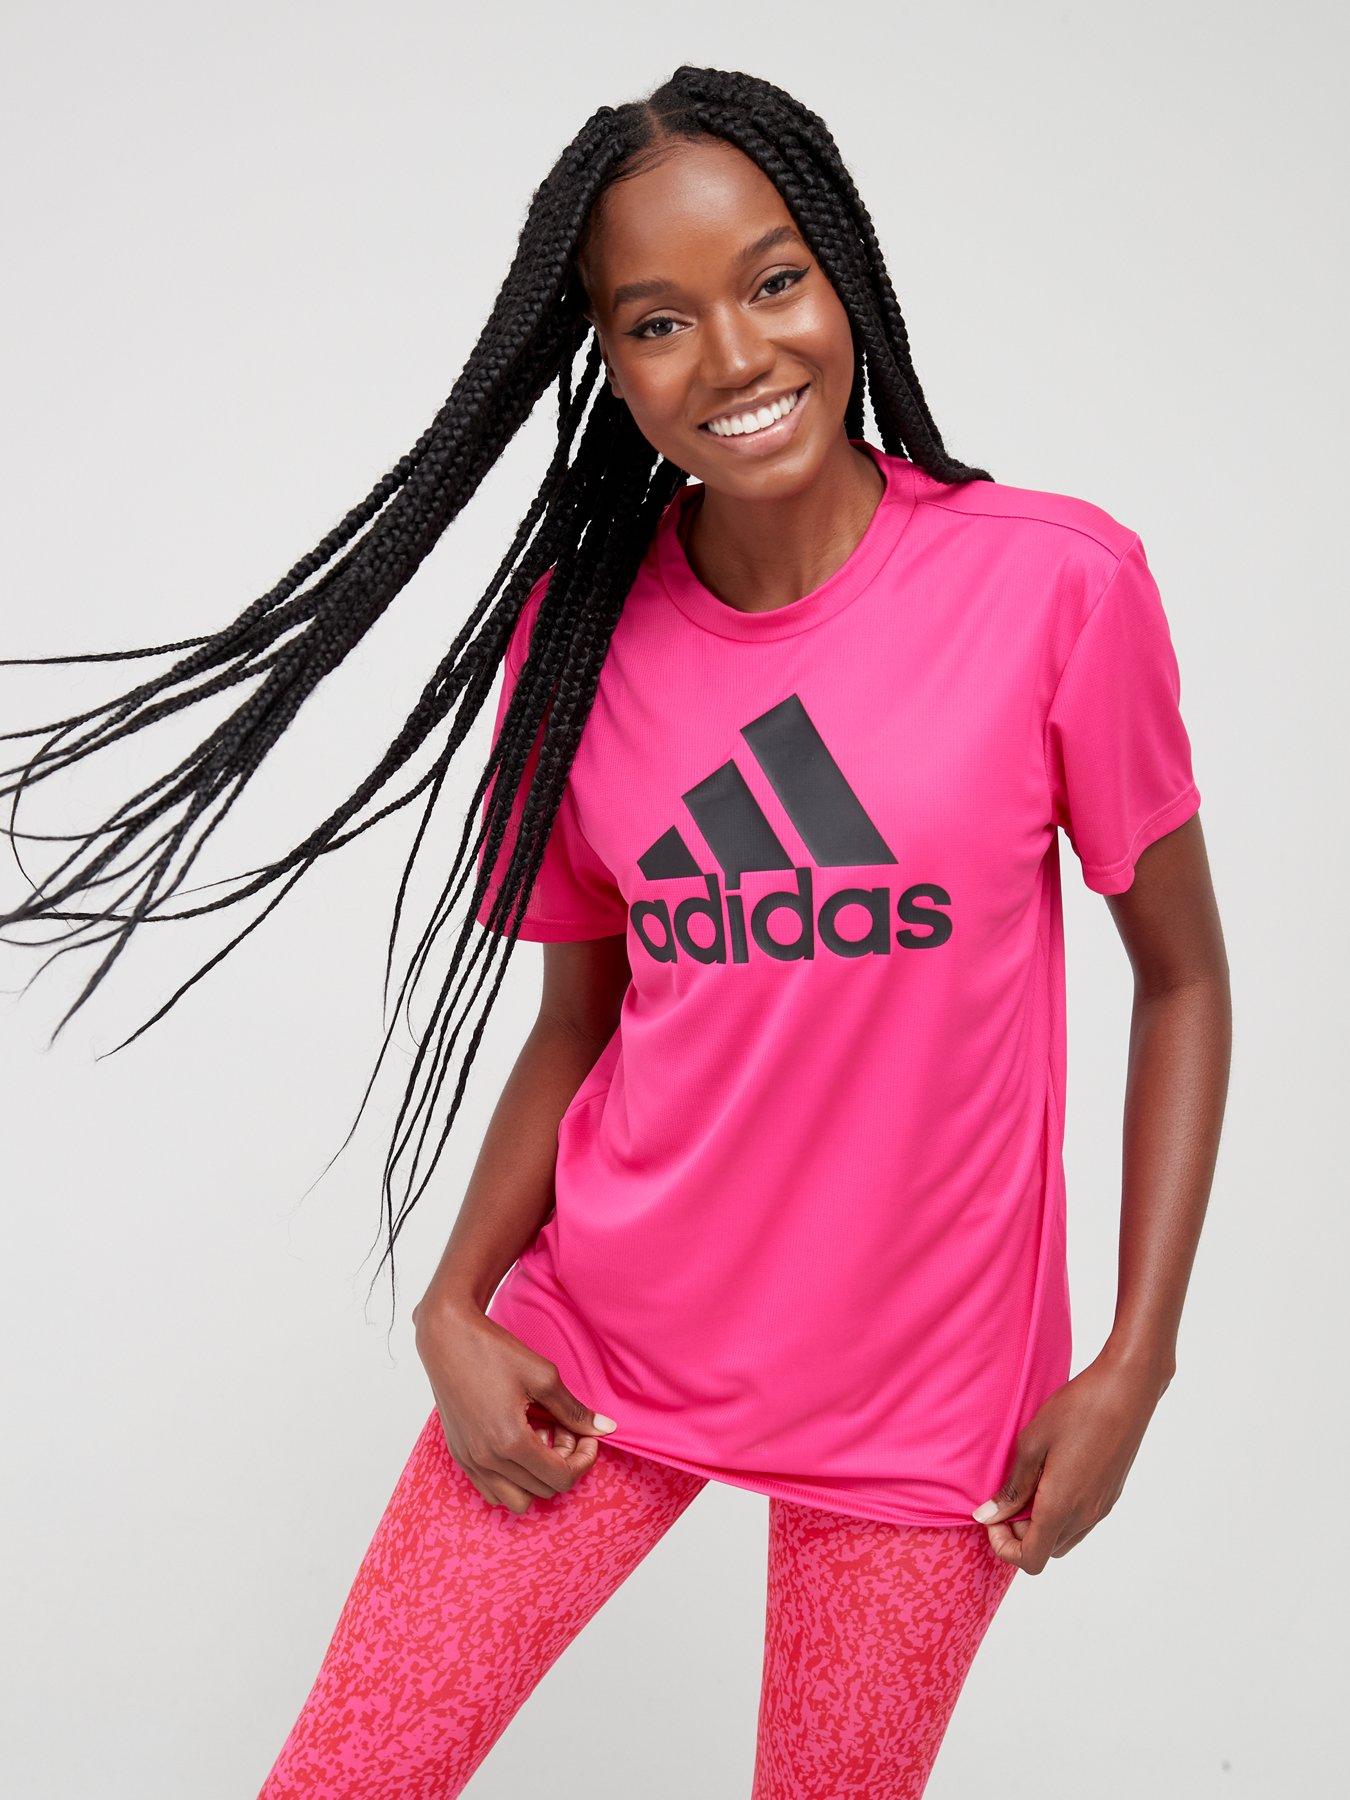 Vueltas y vueltas Disminución Cuerpo Pink | Adidas | T-shirts | Womens sports clothing | Sports & leisure |  www.very.co.uk